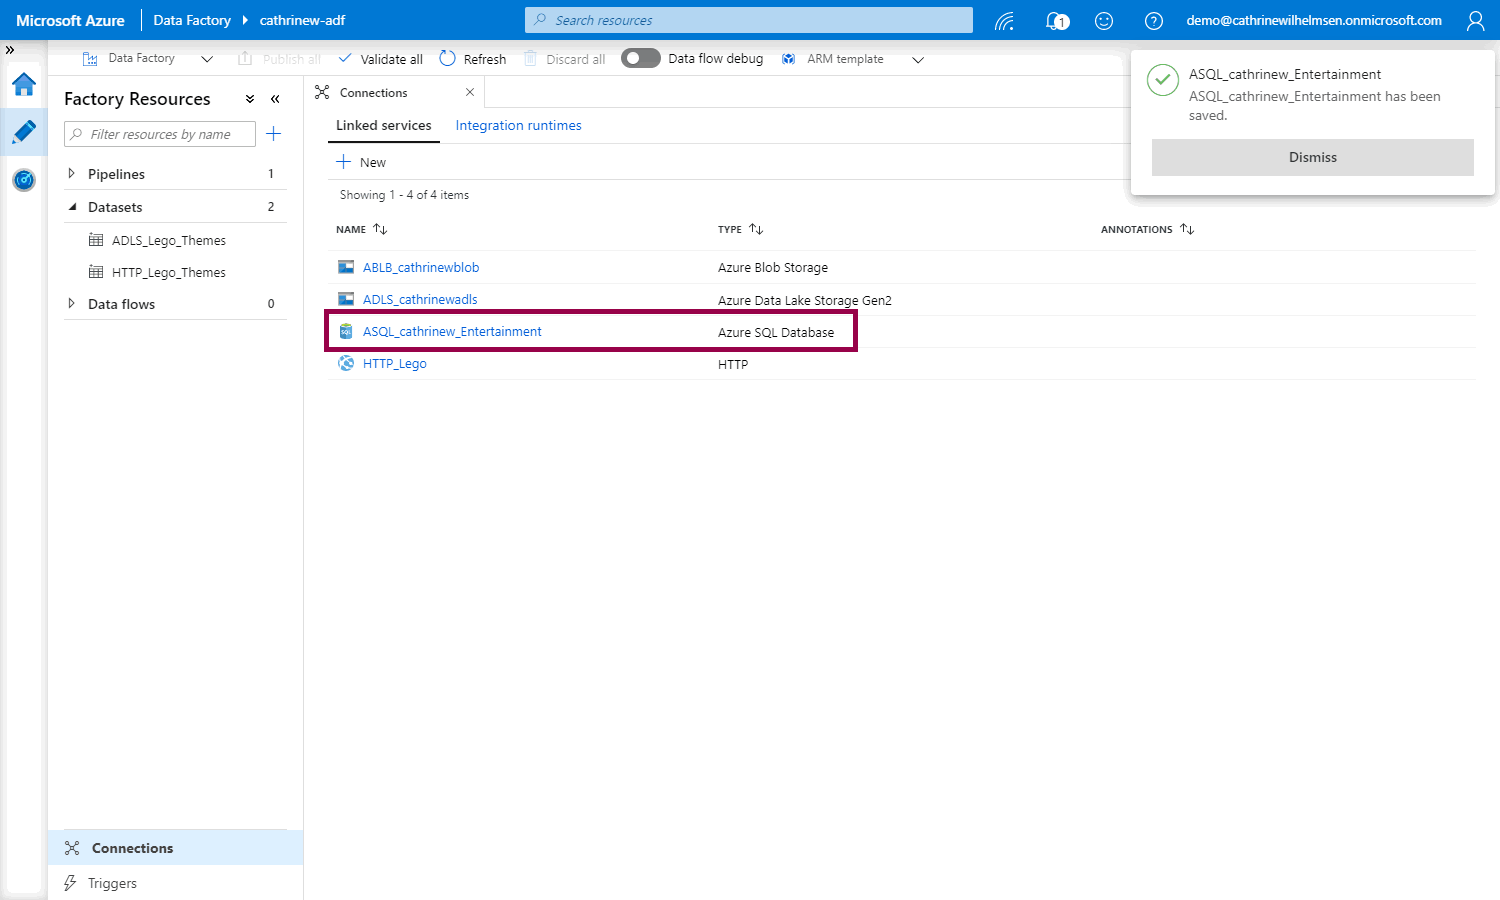 Screenshot of the Azure Data Factory interface, highlighting the new Azure SQL Database linked service